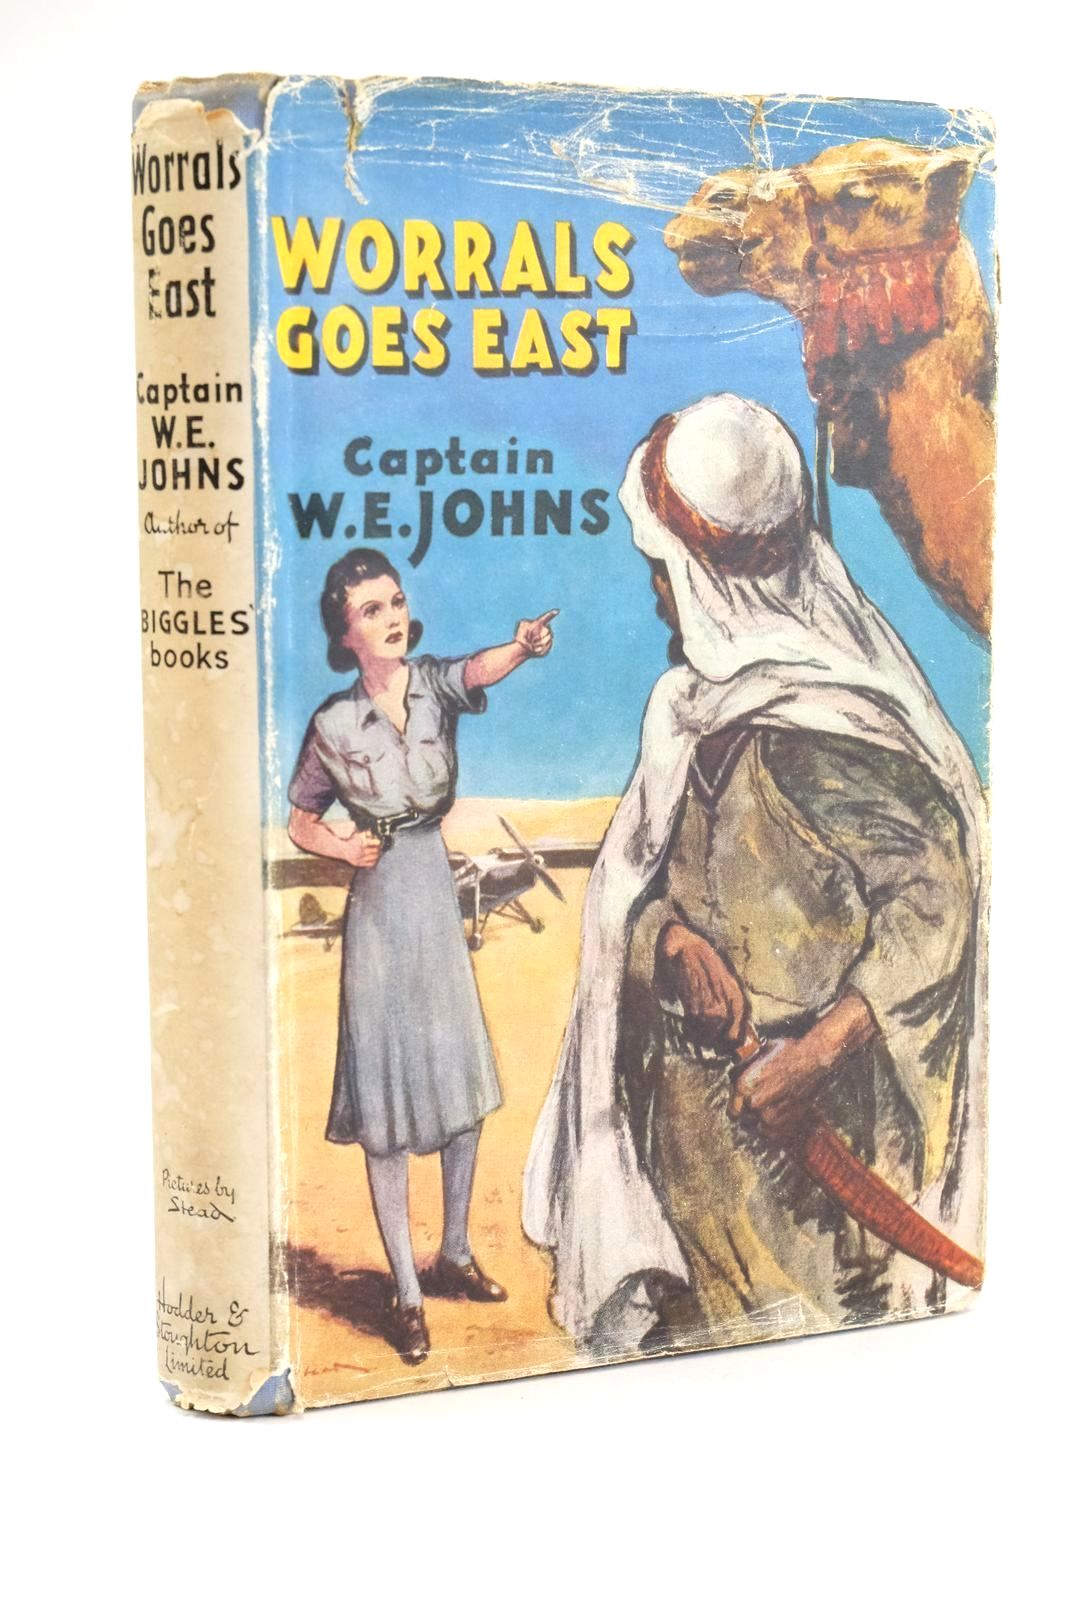 Photo of WORRALS GOES EAST written by Johns, W.E. illustrated by Stead,  published by Hodder &amp; Stoughton (STOCK CODE: 1324865)  for sale by Stella & Rose's Books